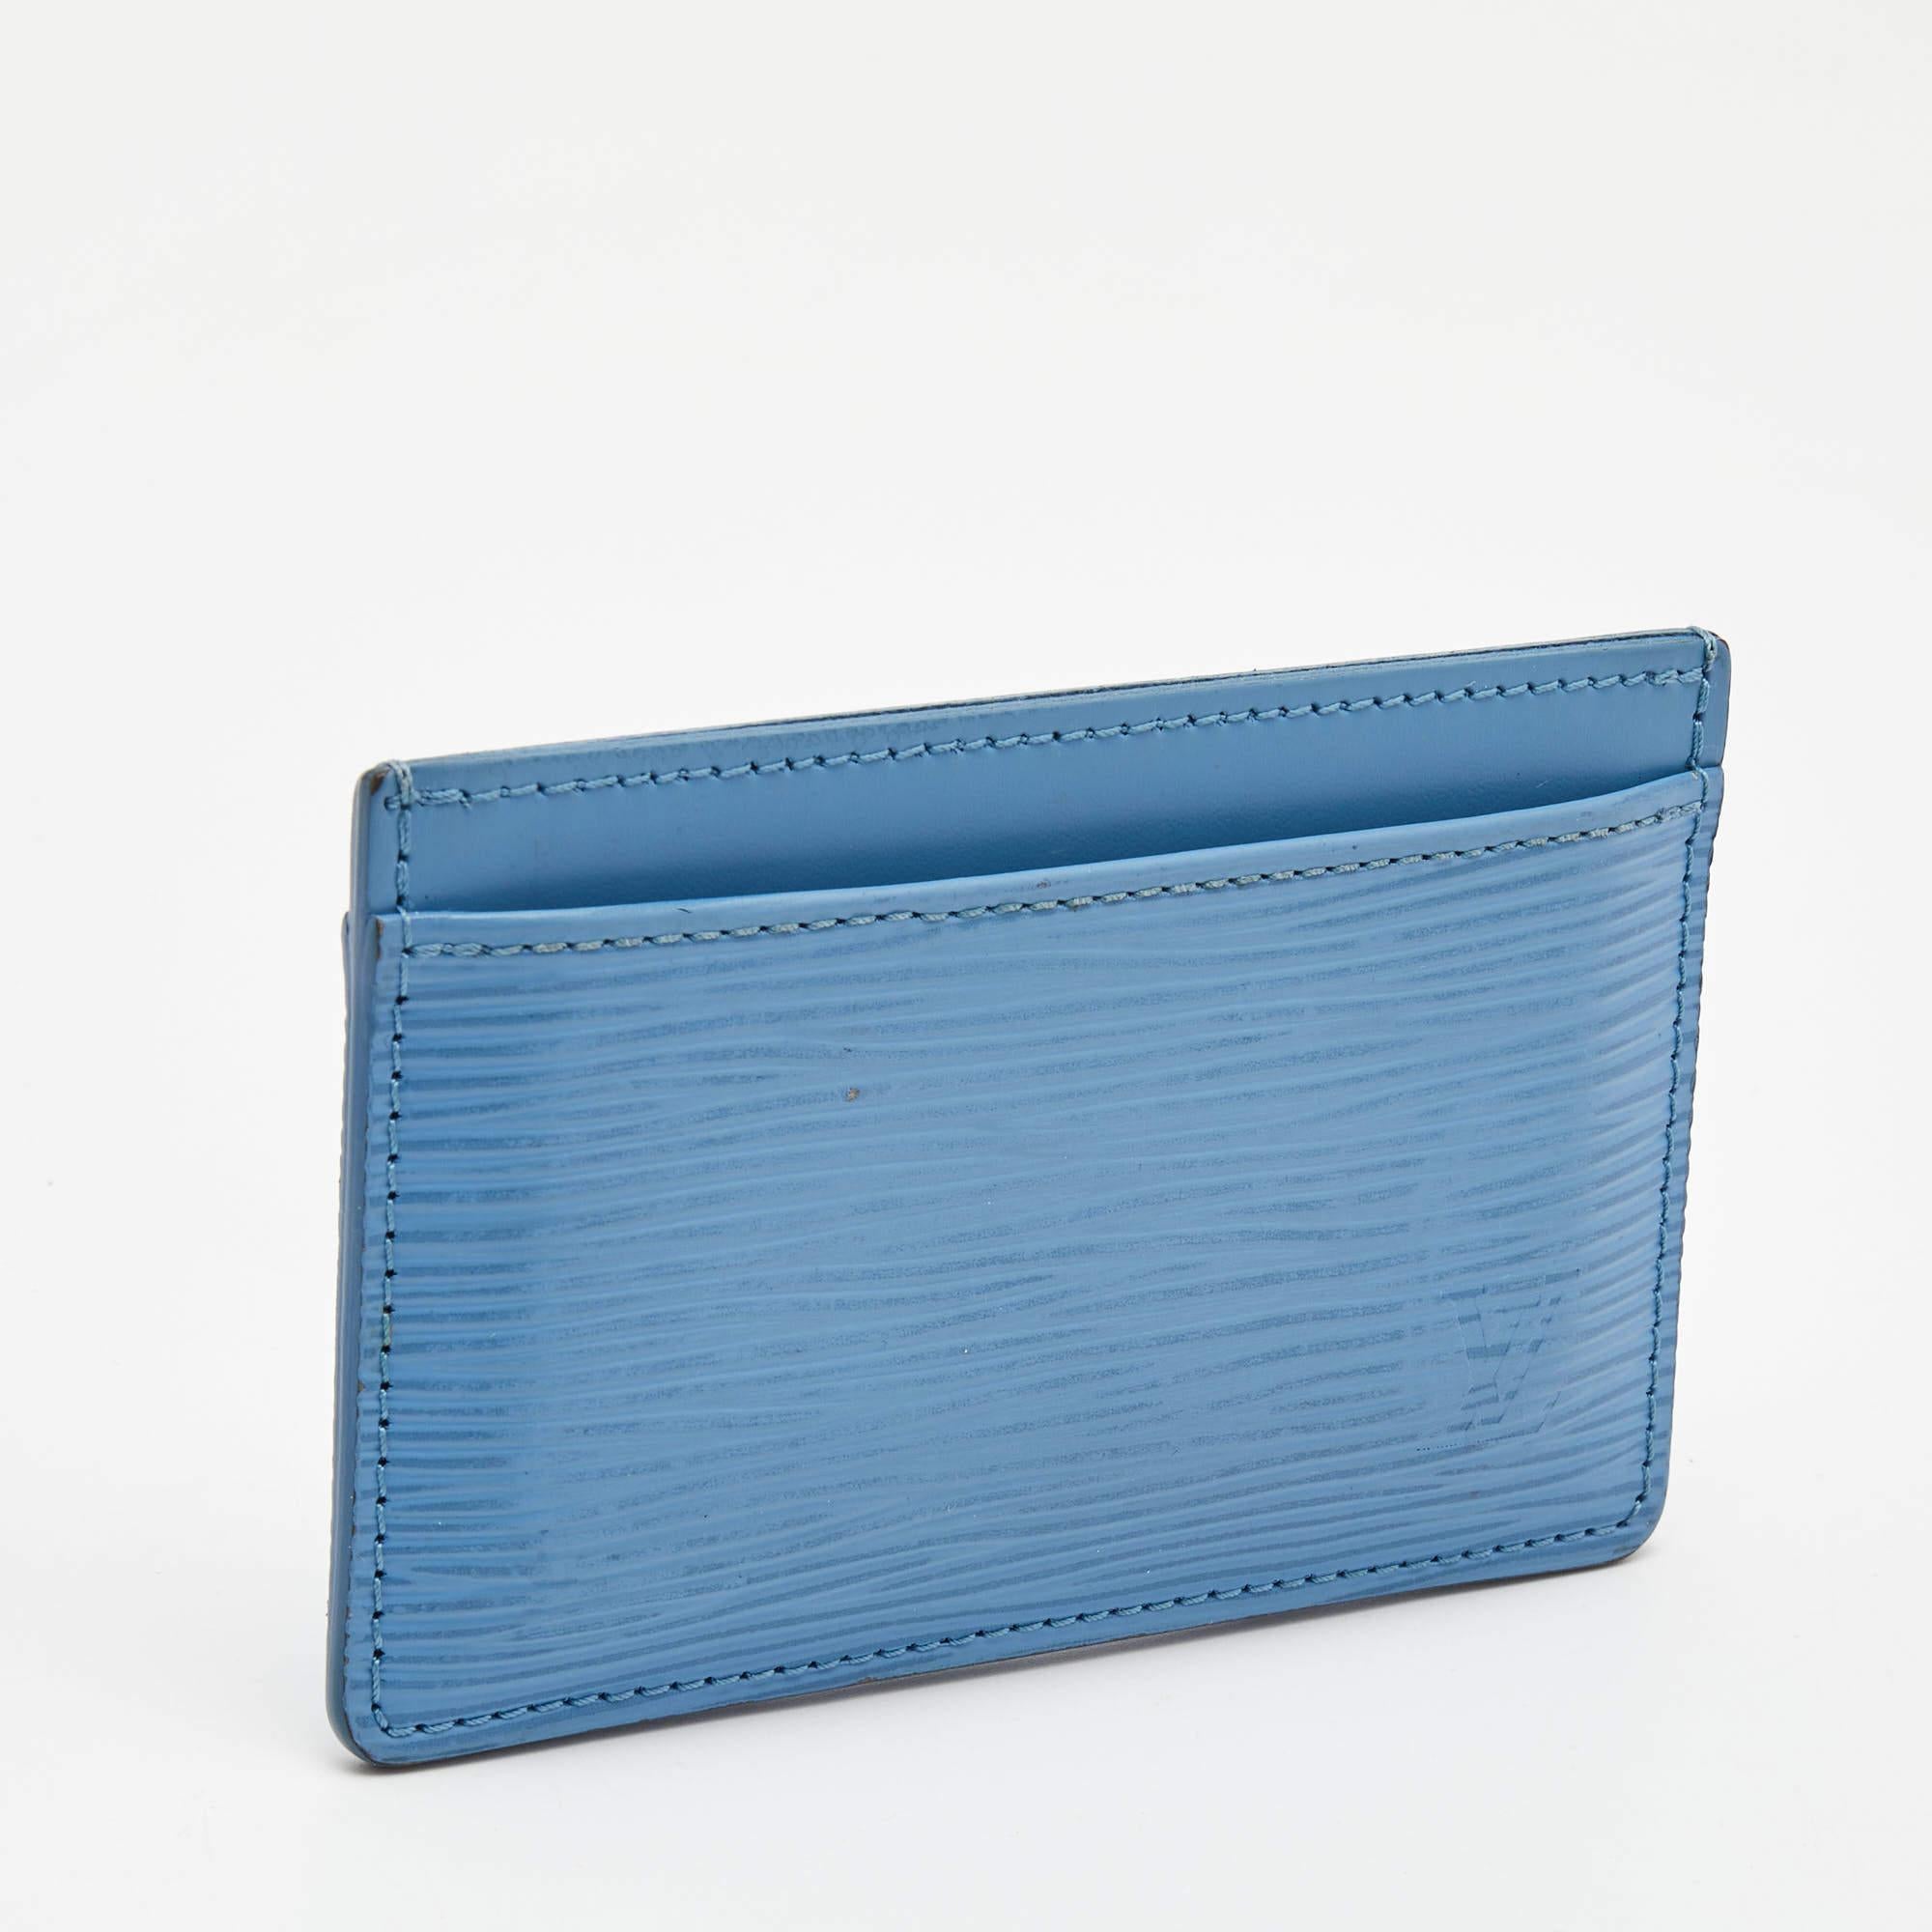 All of the creations by Louis Vuitton are worth the buy as they're made to offer both style and utility! This epi leather card holder comes in a simple style with slip slots to carry your important cards or ID cards easily. Lightweight, this